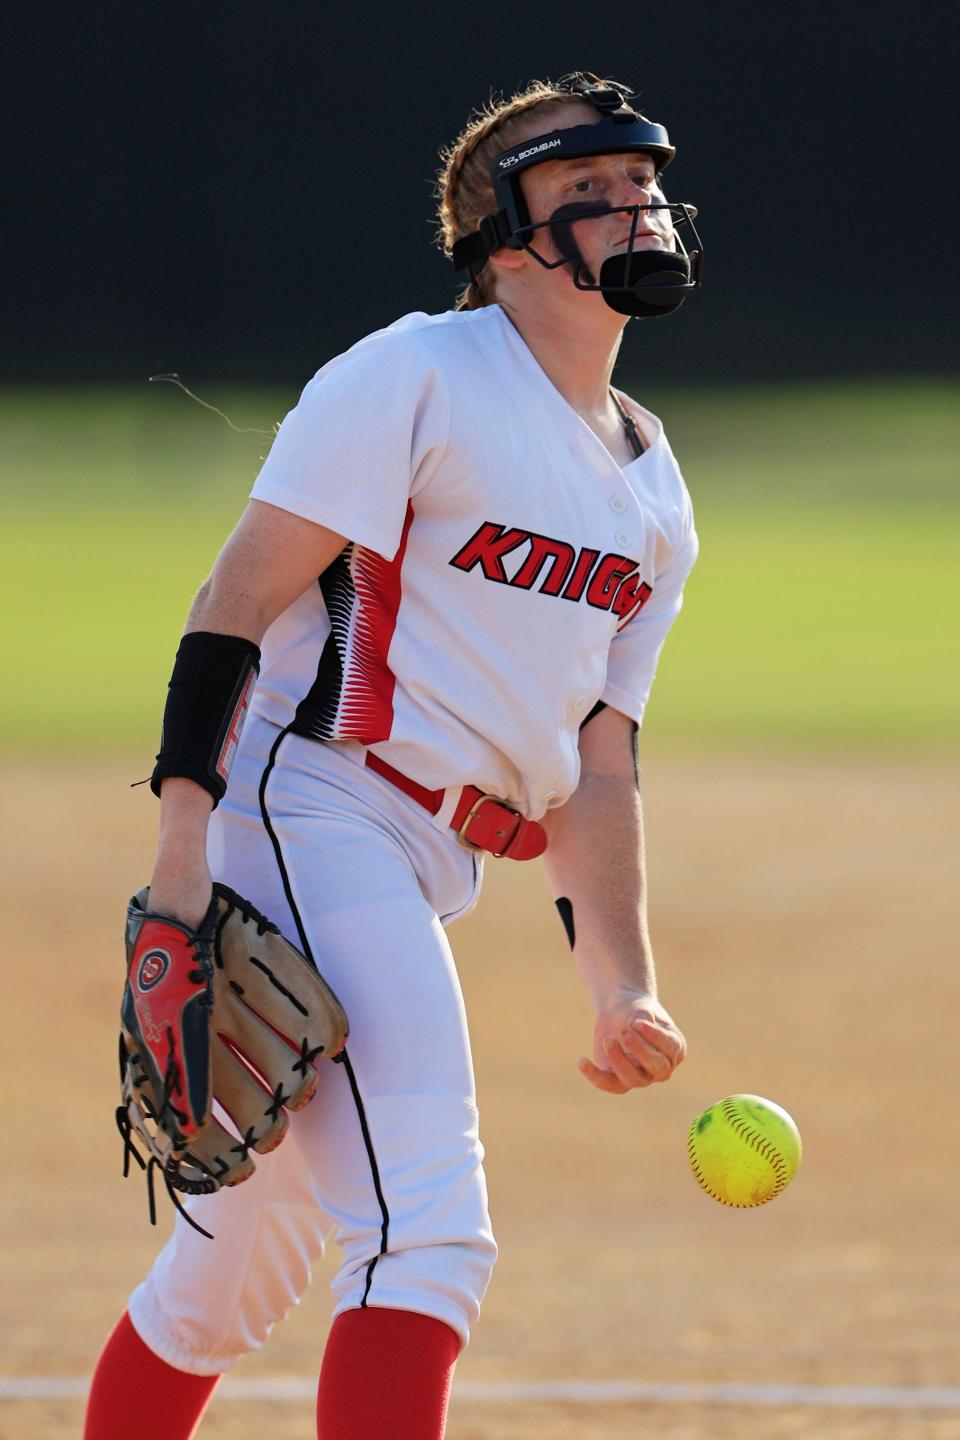 Creekside's Kaylee Martineau (17) warms up during the second inning of an April game against Providence. The FHSAA is proposing a rule change that would reduce the chances of exceptionally long softball contests.